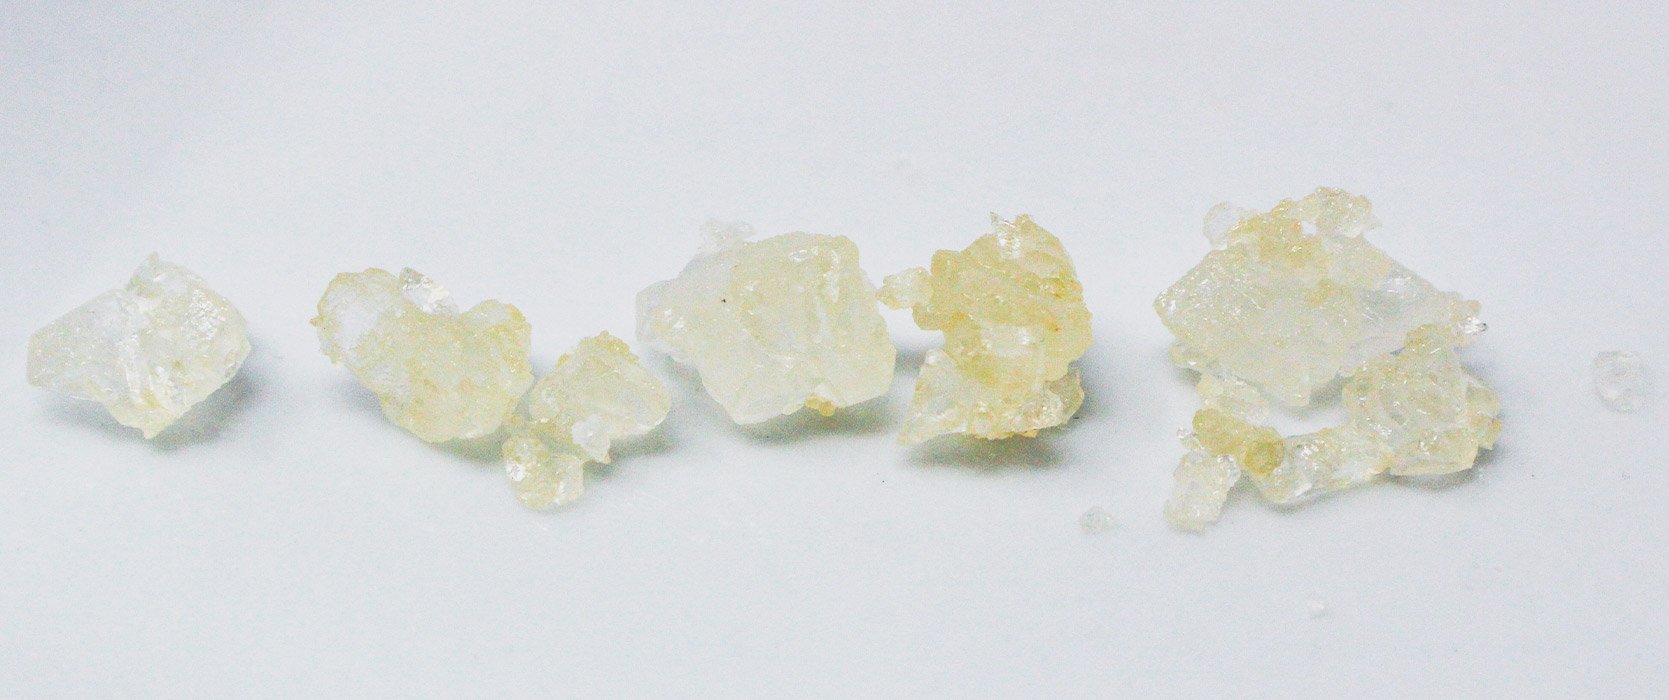 THCA Diamonds: What They Are and How To Make Them